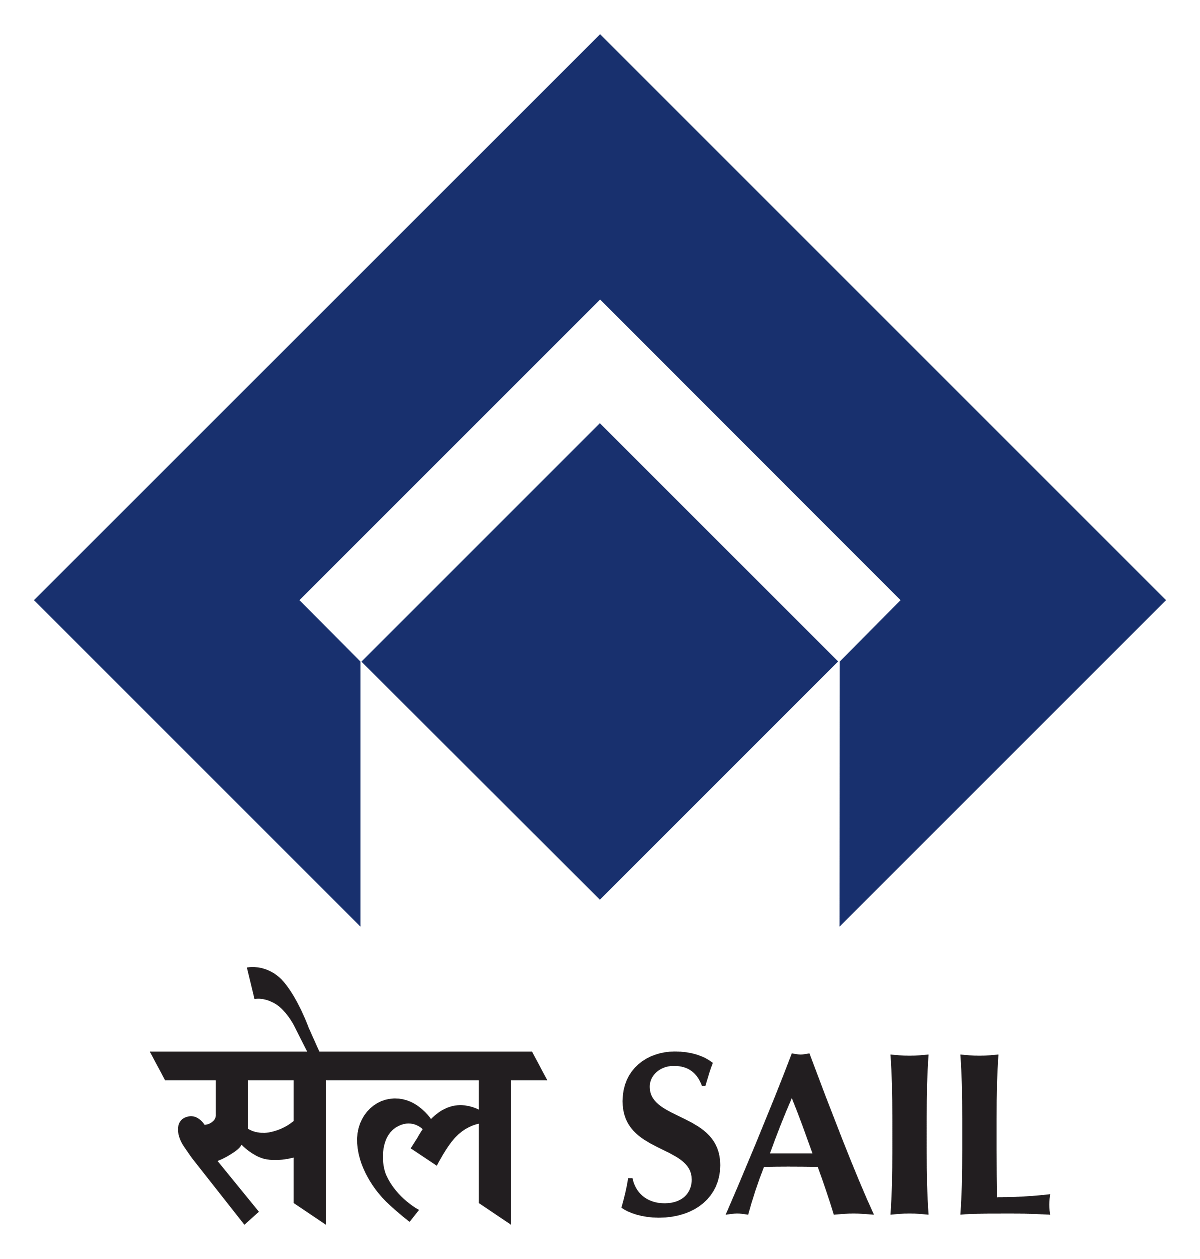 SAIL Recruitment 2019 Process for 361 Medical Executive & Paramedical Staff Posts Conclude Today